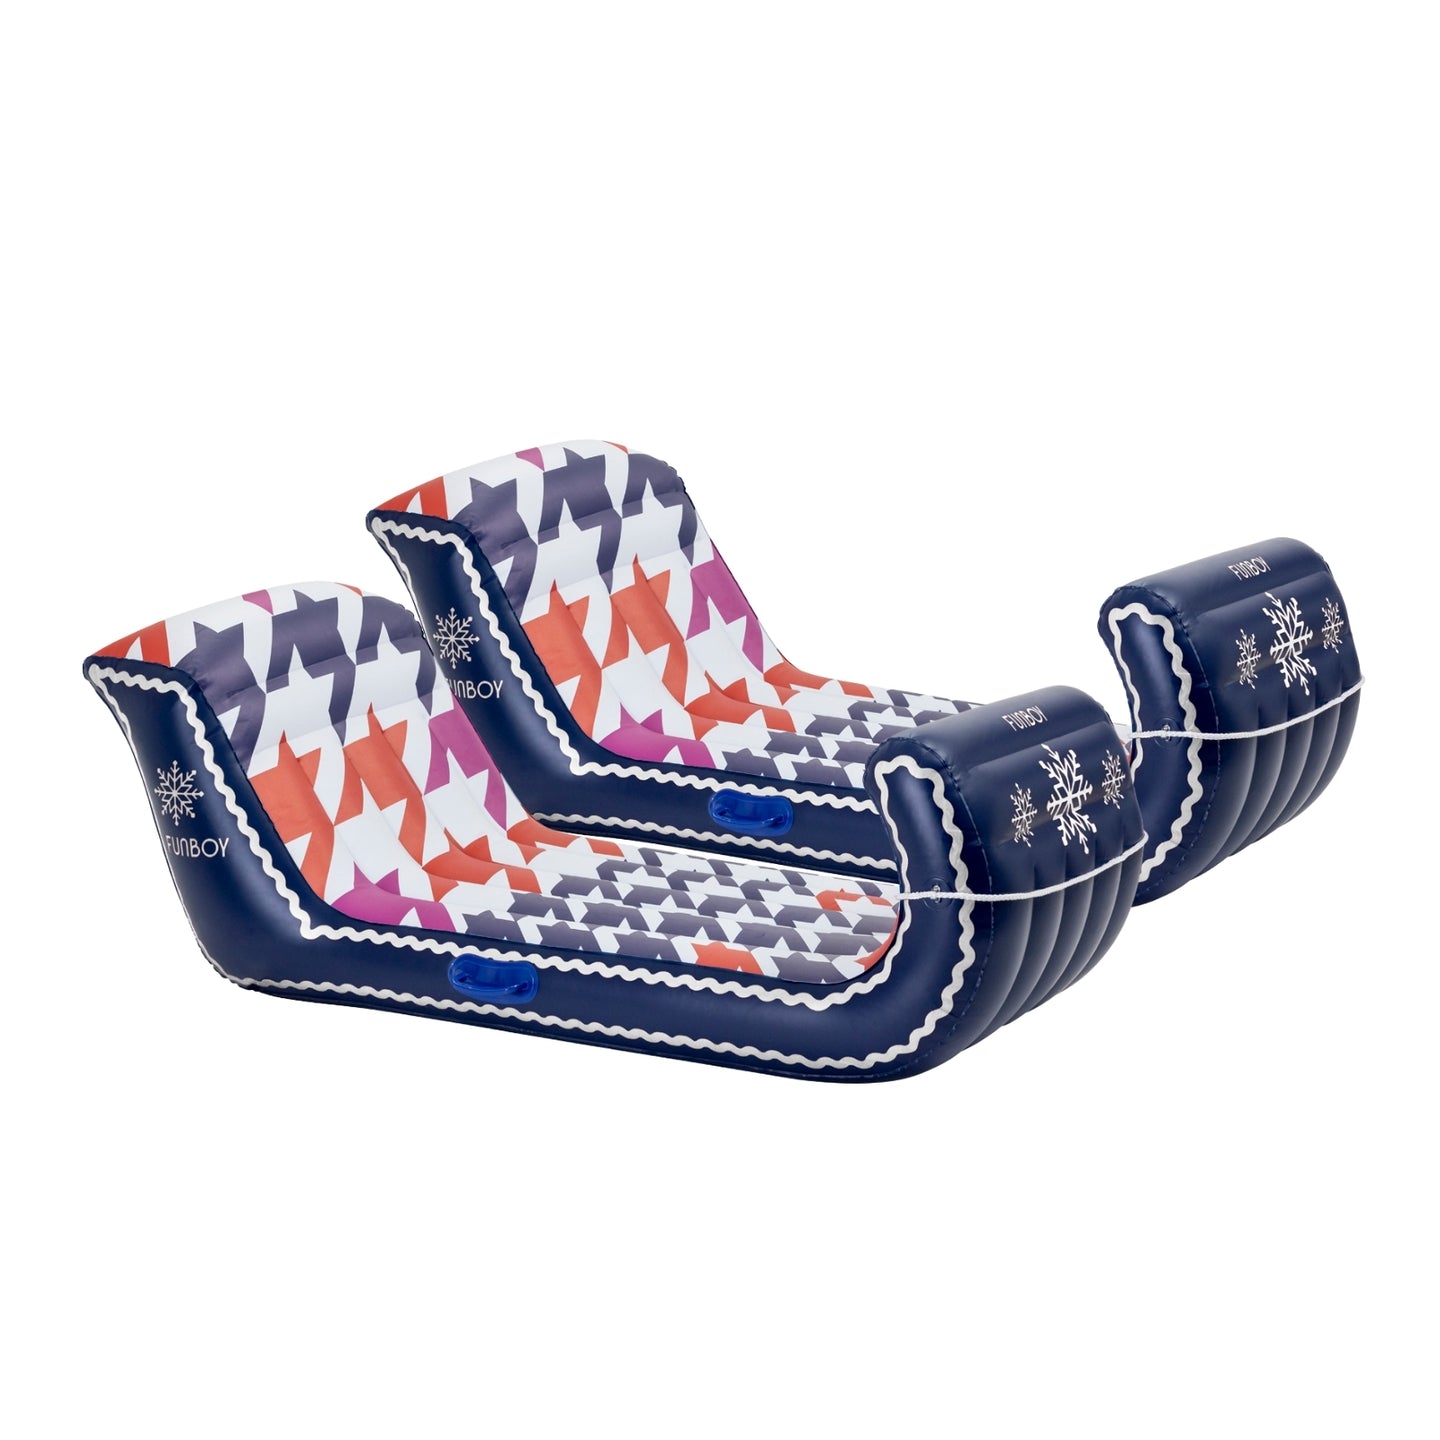 Houndstooth Winter Sleigh Snow Sled - 2 Pack